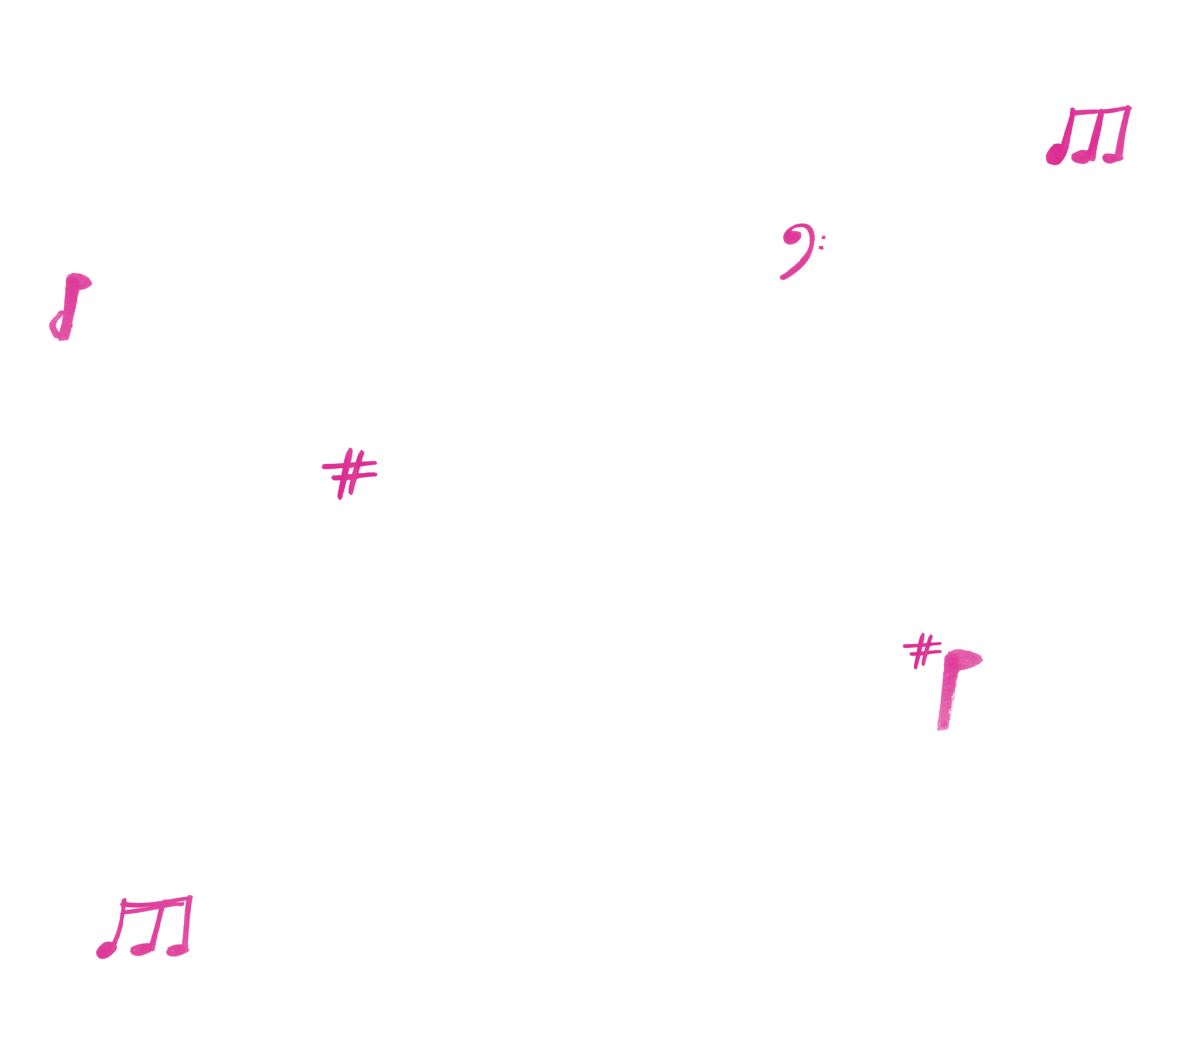 hand-drawn music notes as a background pattern